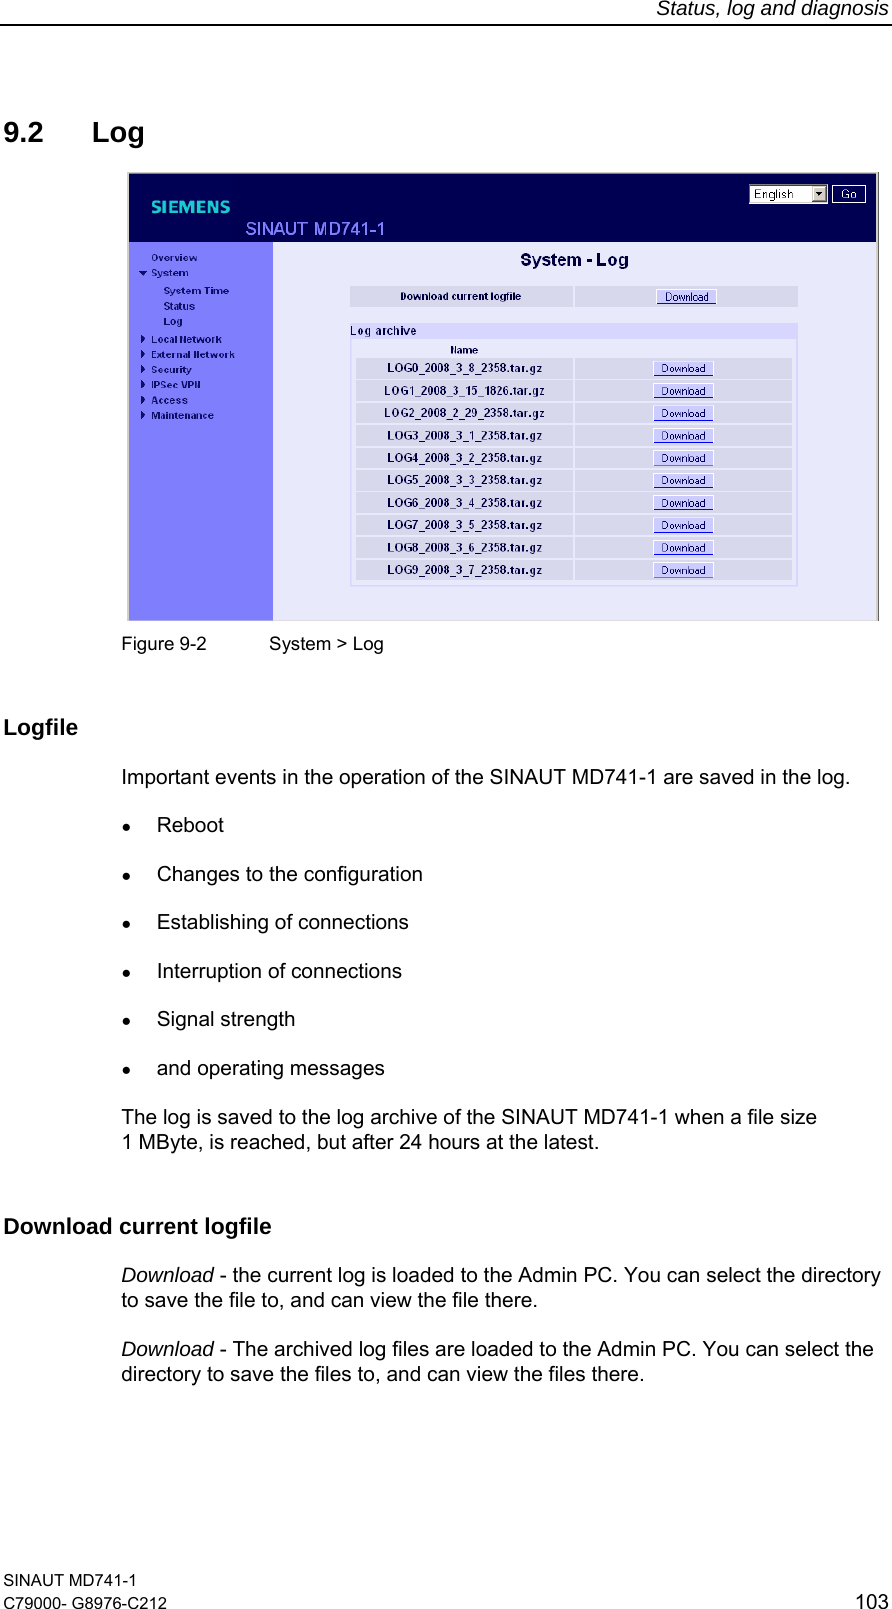 Status, log and diagnosis SINAUT MD741-1 C79000- G8976-C212  103  9.2 Log   Figure 9-2  System &gt; Log Logfile Important events in the operation of the SINAUT MD741-1 are saved in the log. ● Reboot ● Changes to the configuration ● Establishing of connections ● Interruption of connections ● Signal strength  ● and operating messages The log is saved to the log archive of the SINAUT MD741-1 when a file size  1 MByte, is reached, but after 24 hours at the latest. Download current logfile  Download - the current log is loaded to the Admin PC. You can select the directory to save the file to, and can view the file there. Download - The archived log files are loaded to the Admin PC. You can select the directory to save the files to, and can view the files there. 